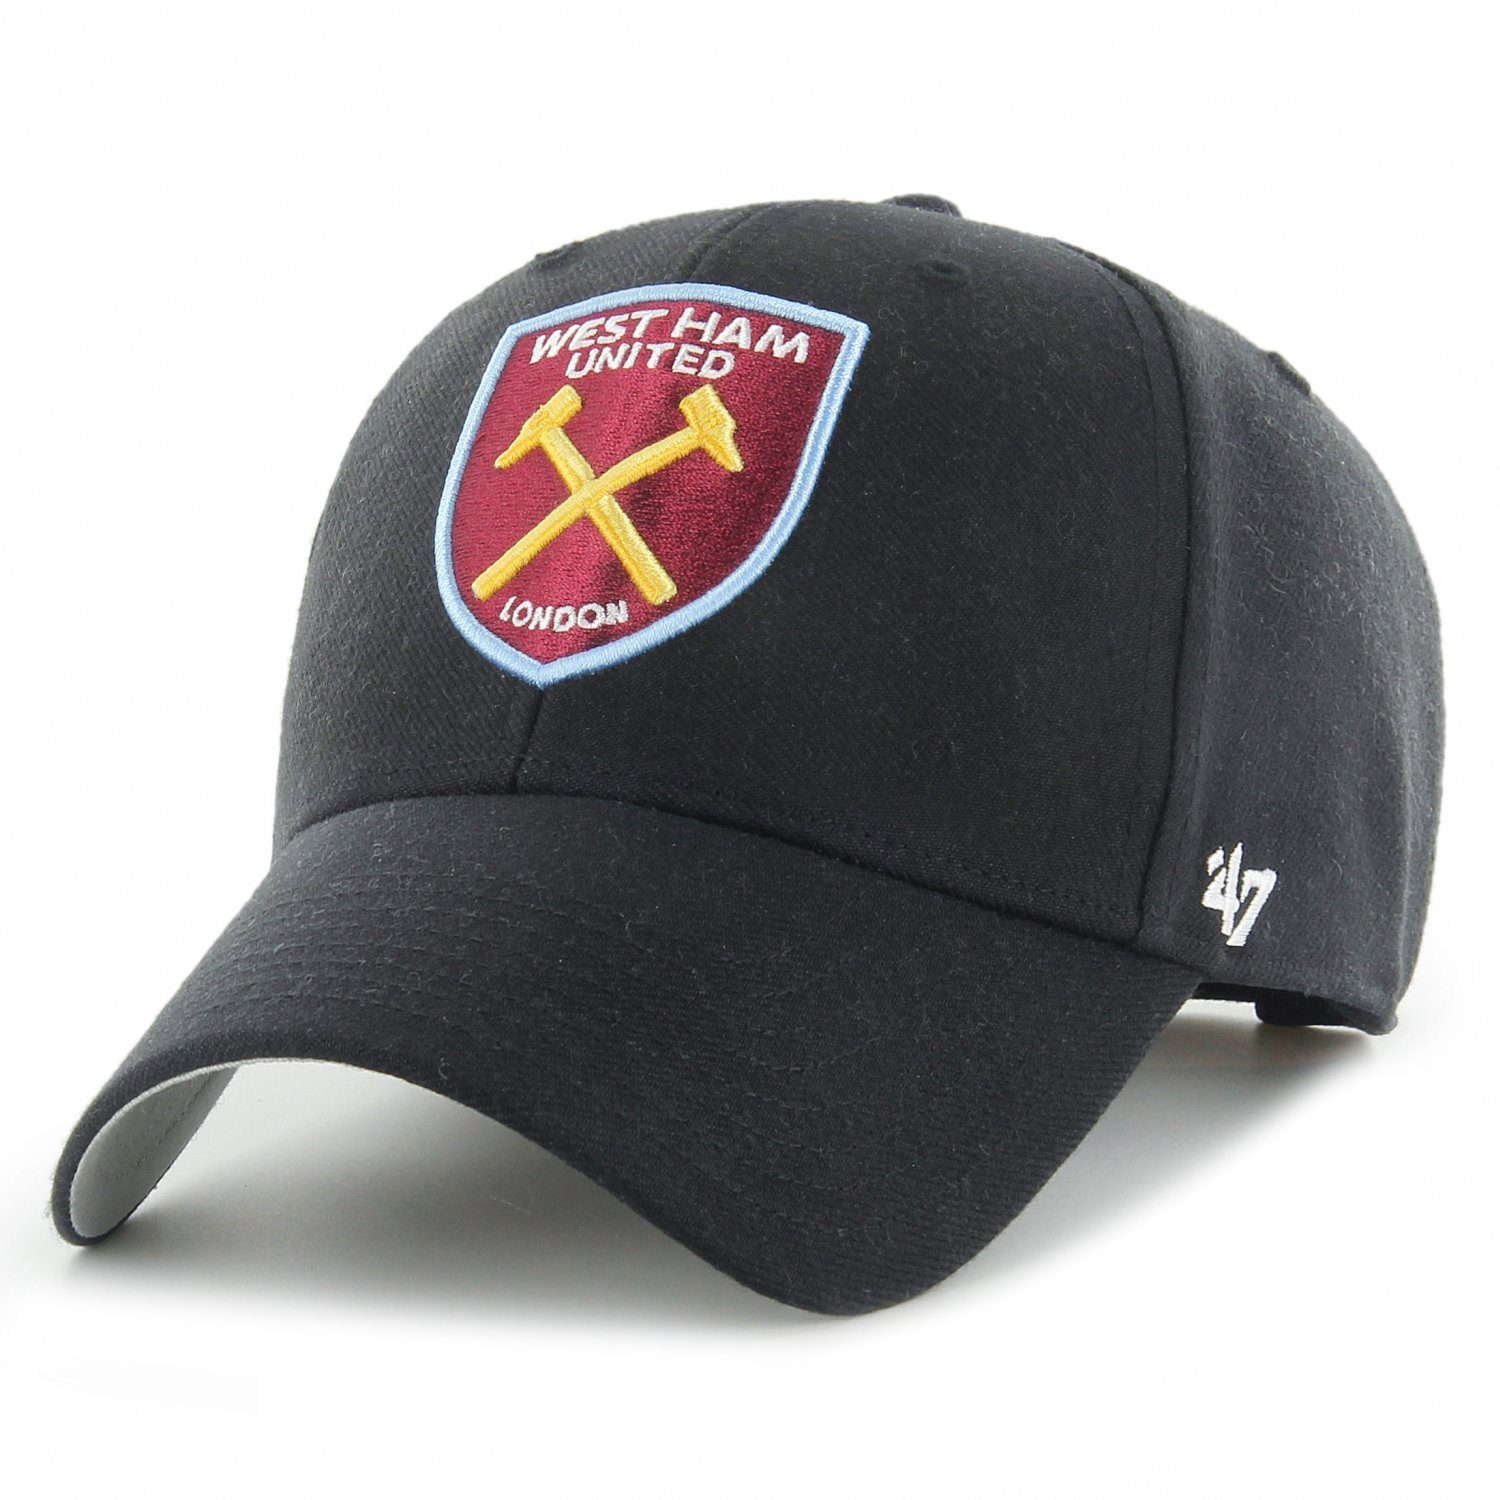 United Brand '47 Trucker Relaxed Cap Fit West Ham